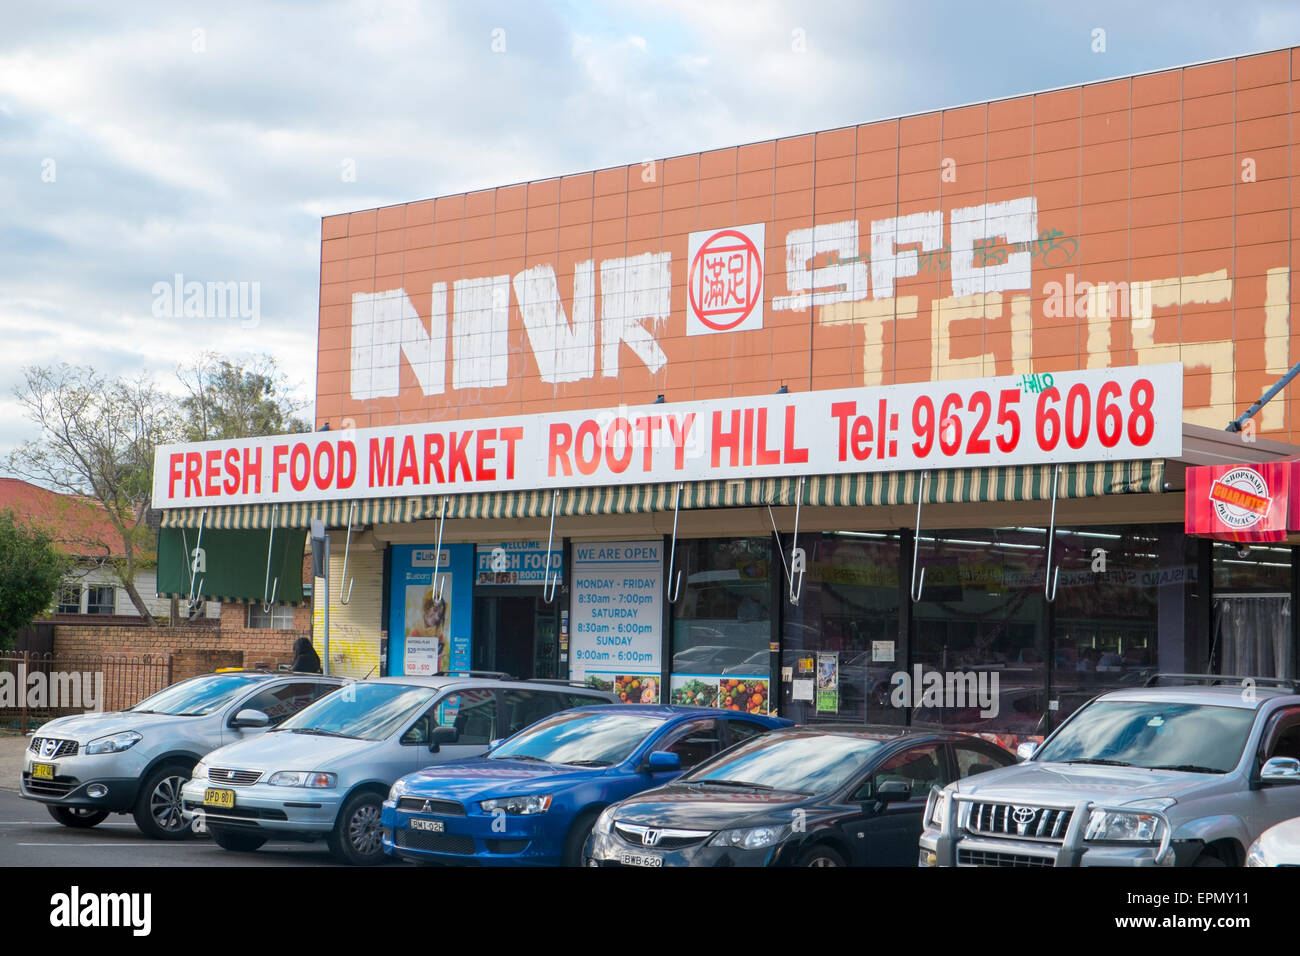 Fresh food market in Rooty Hill, a suburb area in Western Sydney,part of the city of Blacktown, new south wales,australia Stock Photo